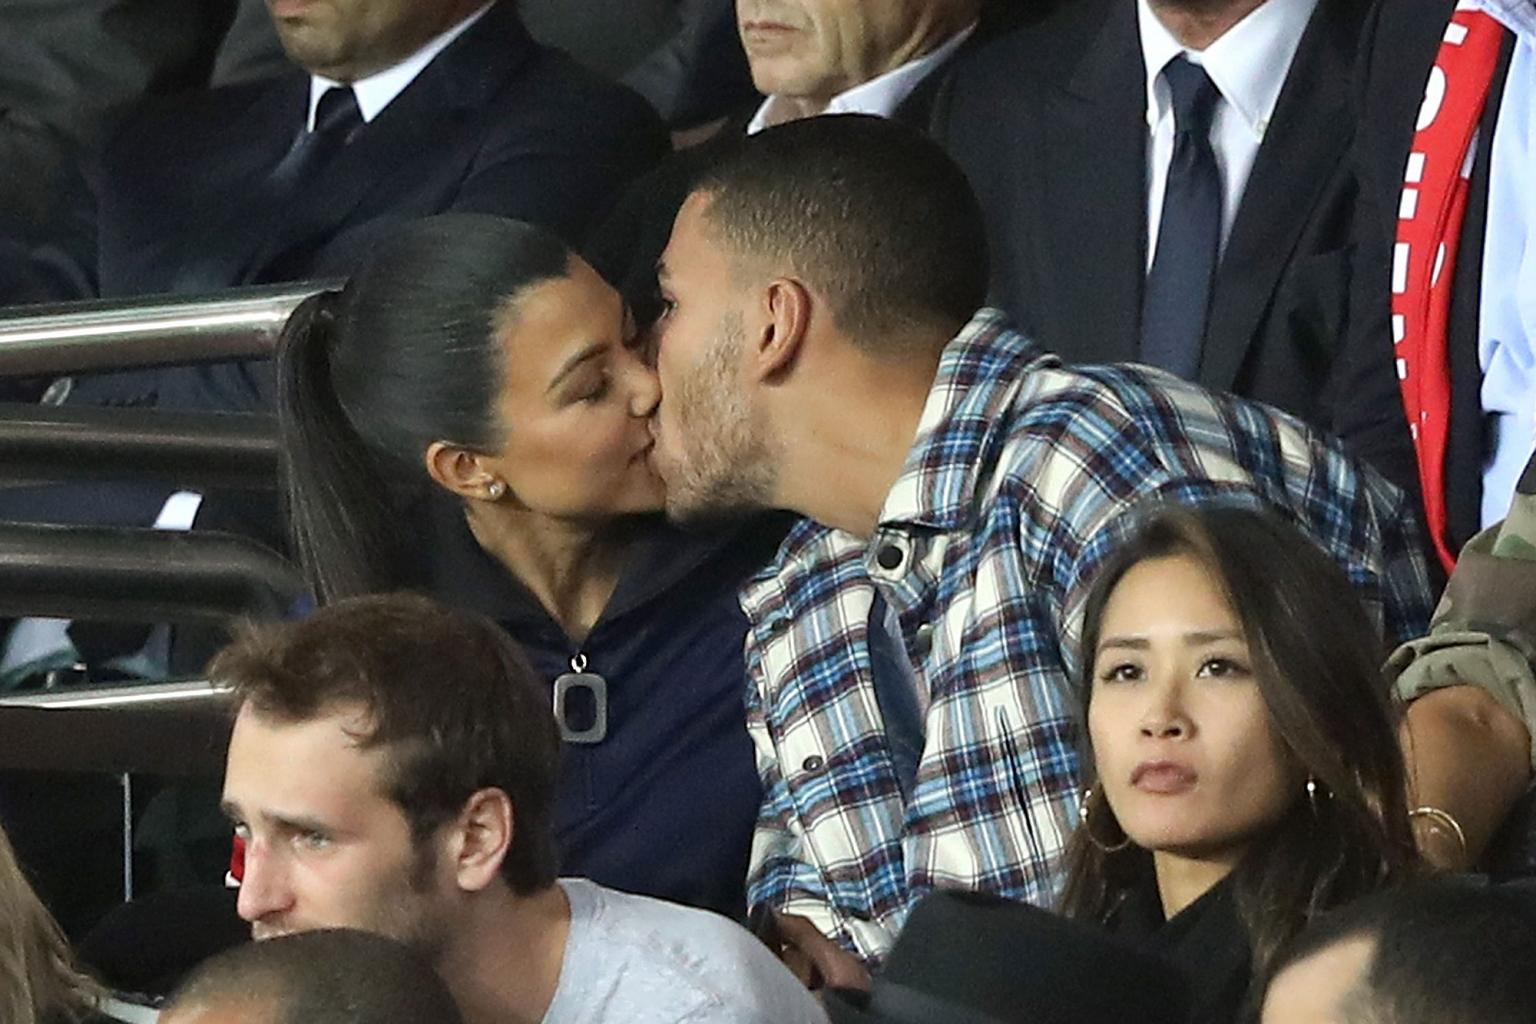 Kourtney Kardashian and Boyfriend    Younes Bendjima Share Steamy Kiss at Paris Soccer Game          '  But He Appears    Distracted